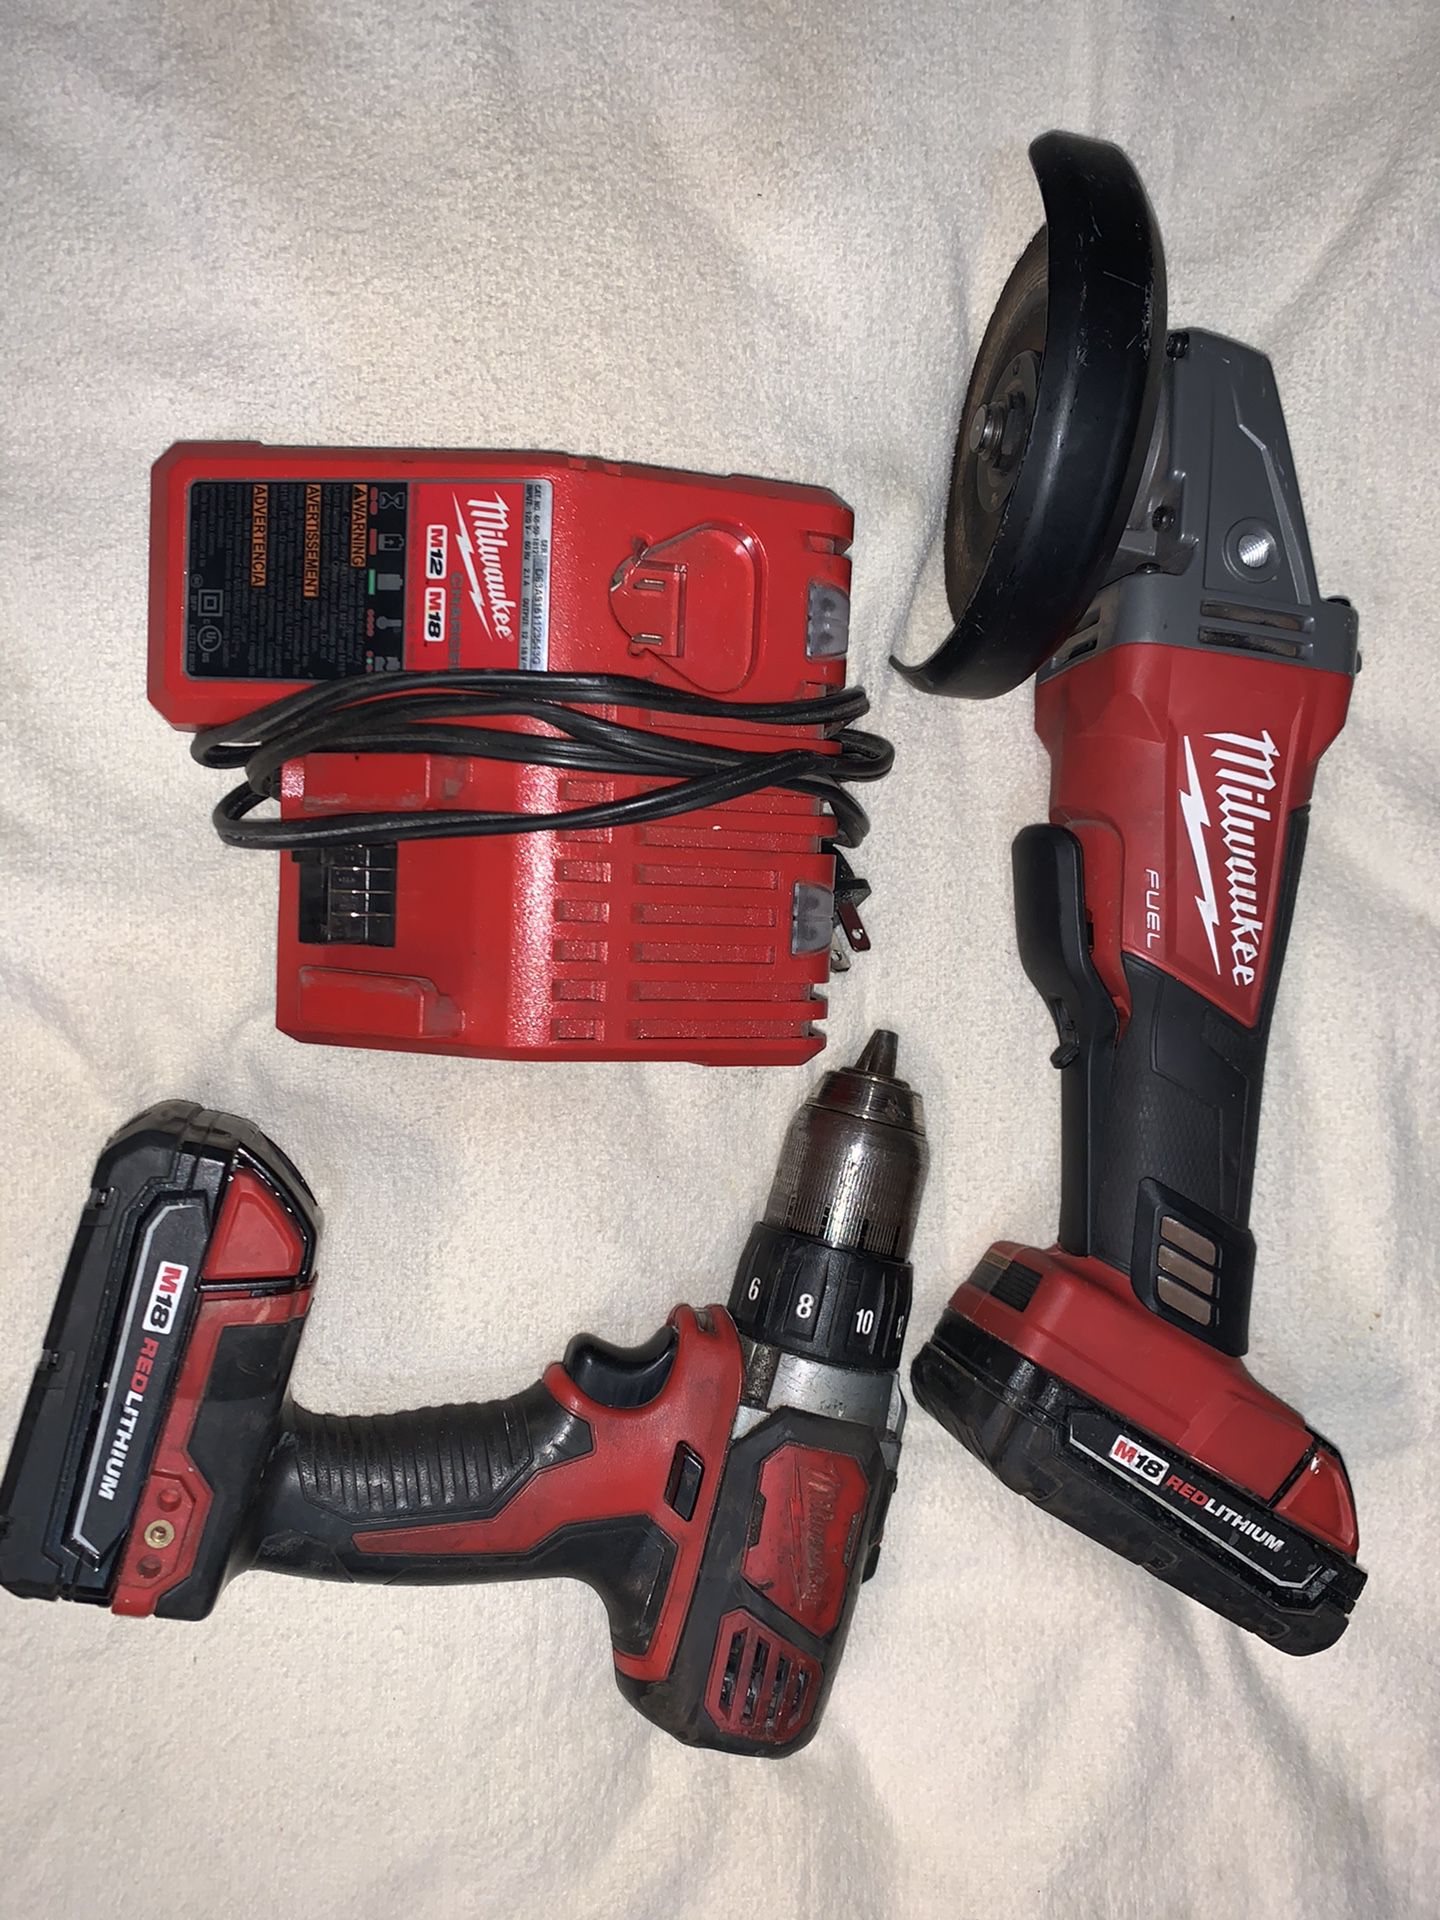 Milwaukee M18 grinder and drill